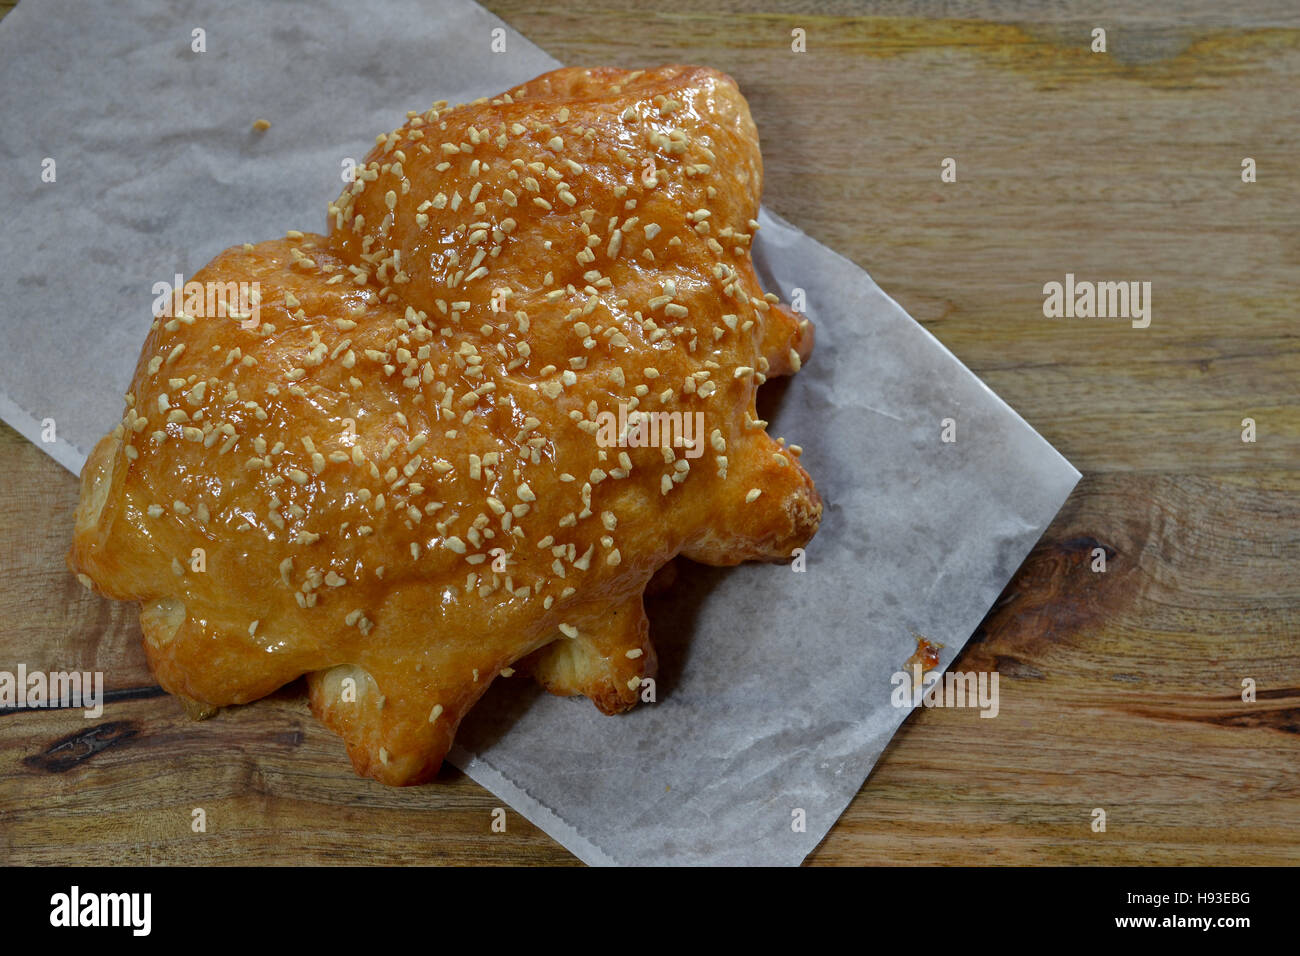 Austrian pastry filled with seasonal fruit, covered with almond crumbs and coated with sugar, on white paper over wooden background, viewed from above Stock Photo